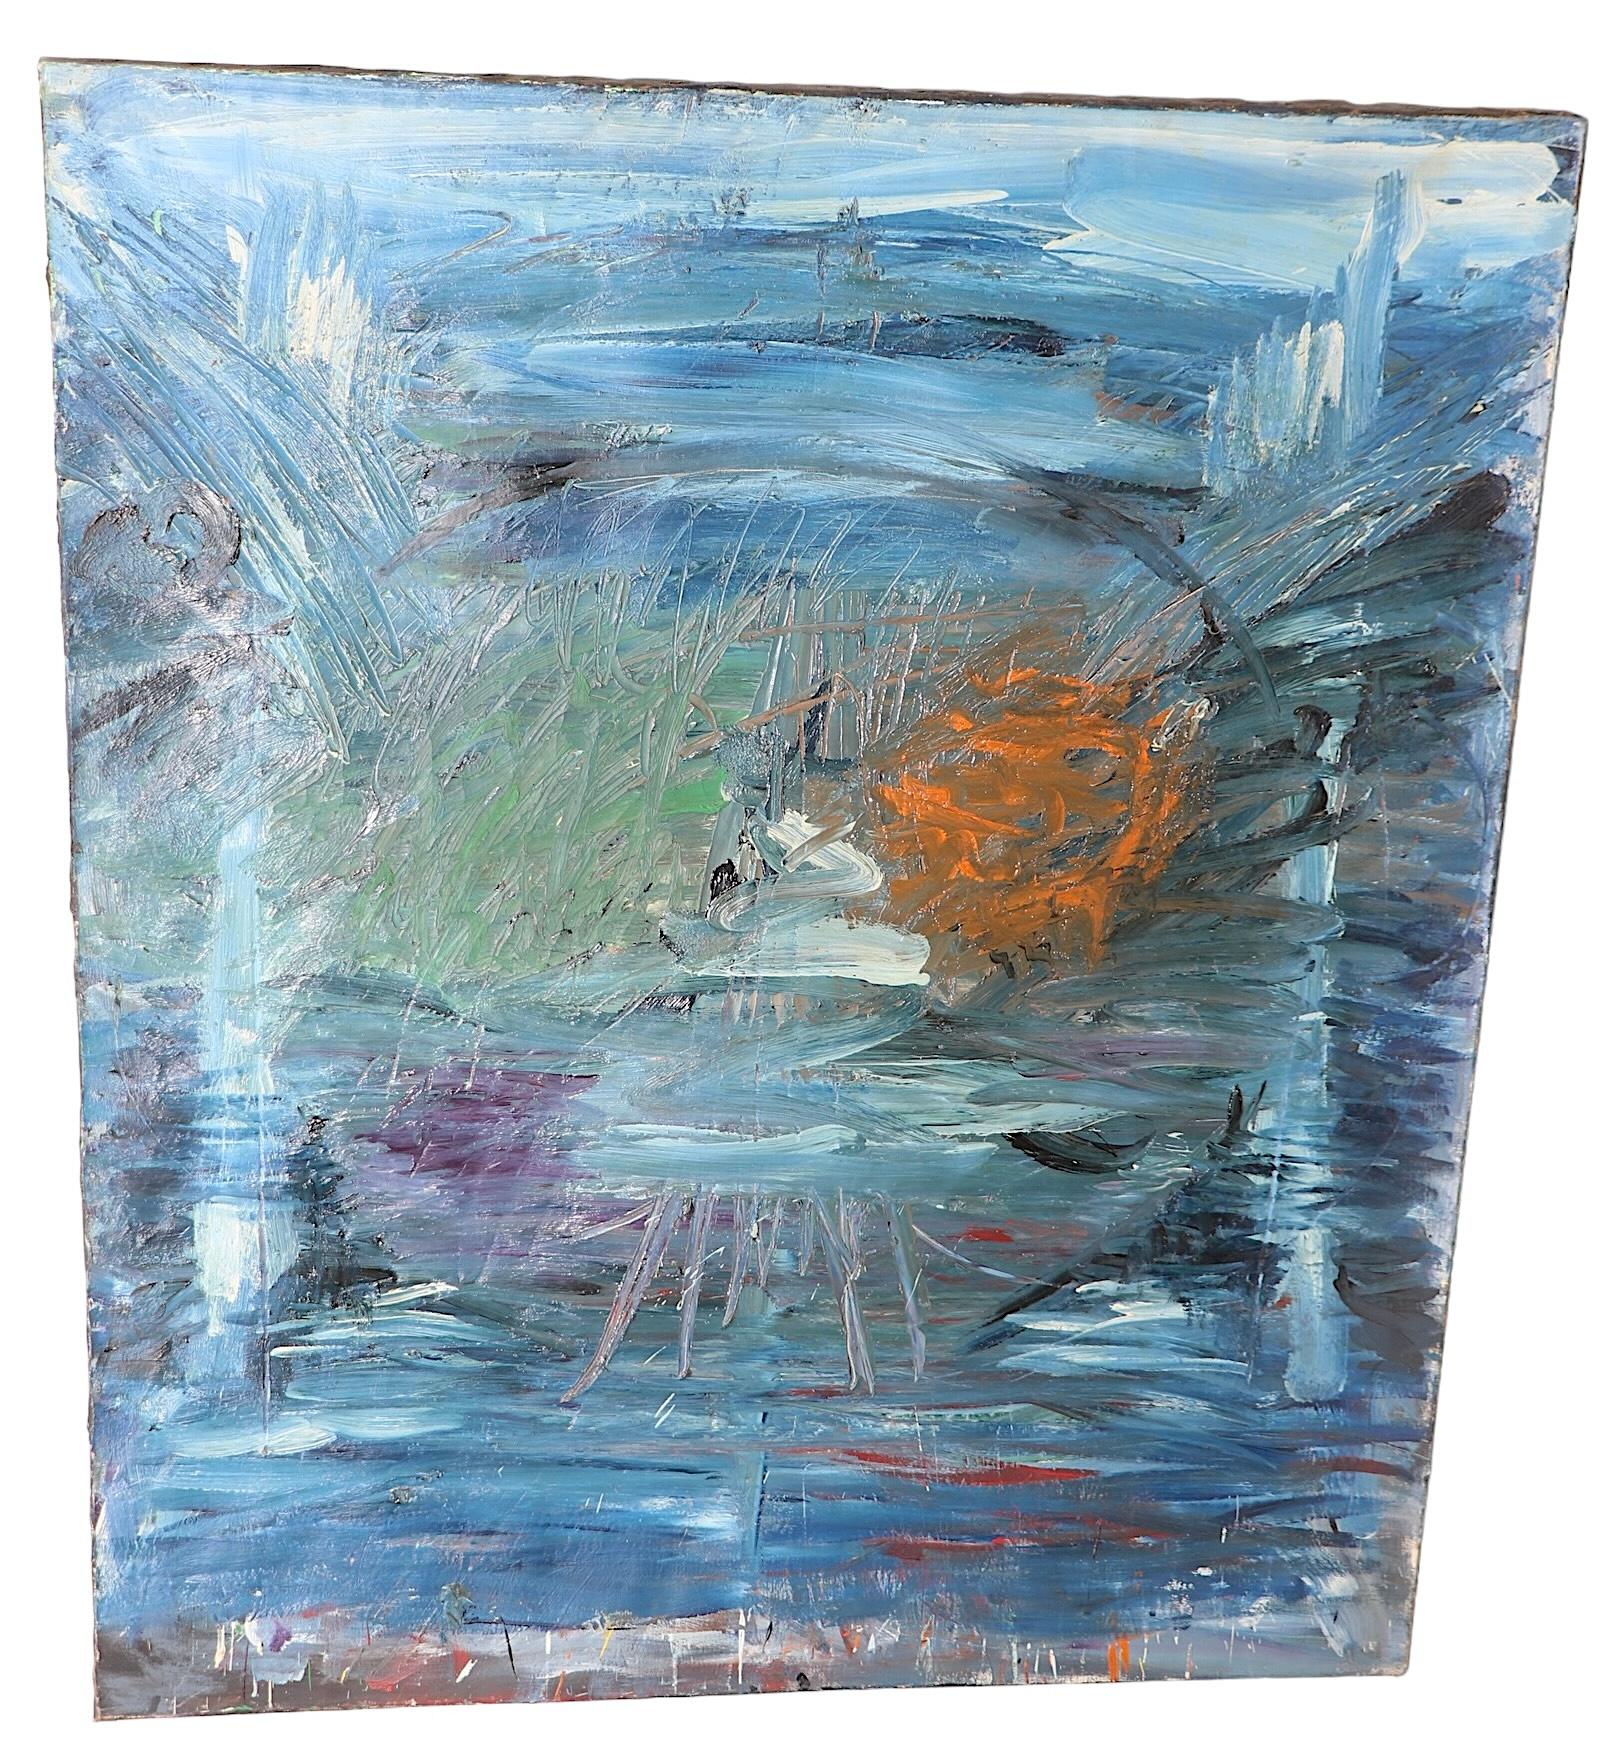 Large abstract acrylic painting by noted NYC artist Jules Granowitter. The painting is mainly executed in tones of blue with orange, purple,  green, gray and red also visible. Nice big size without being unmanageable, the painting is a classic